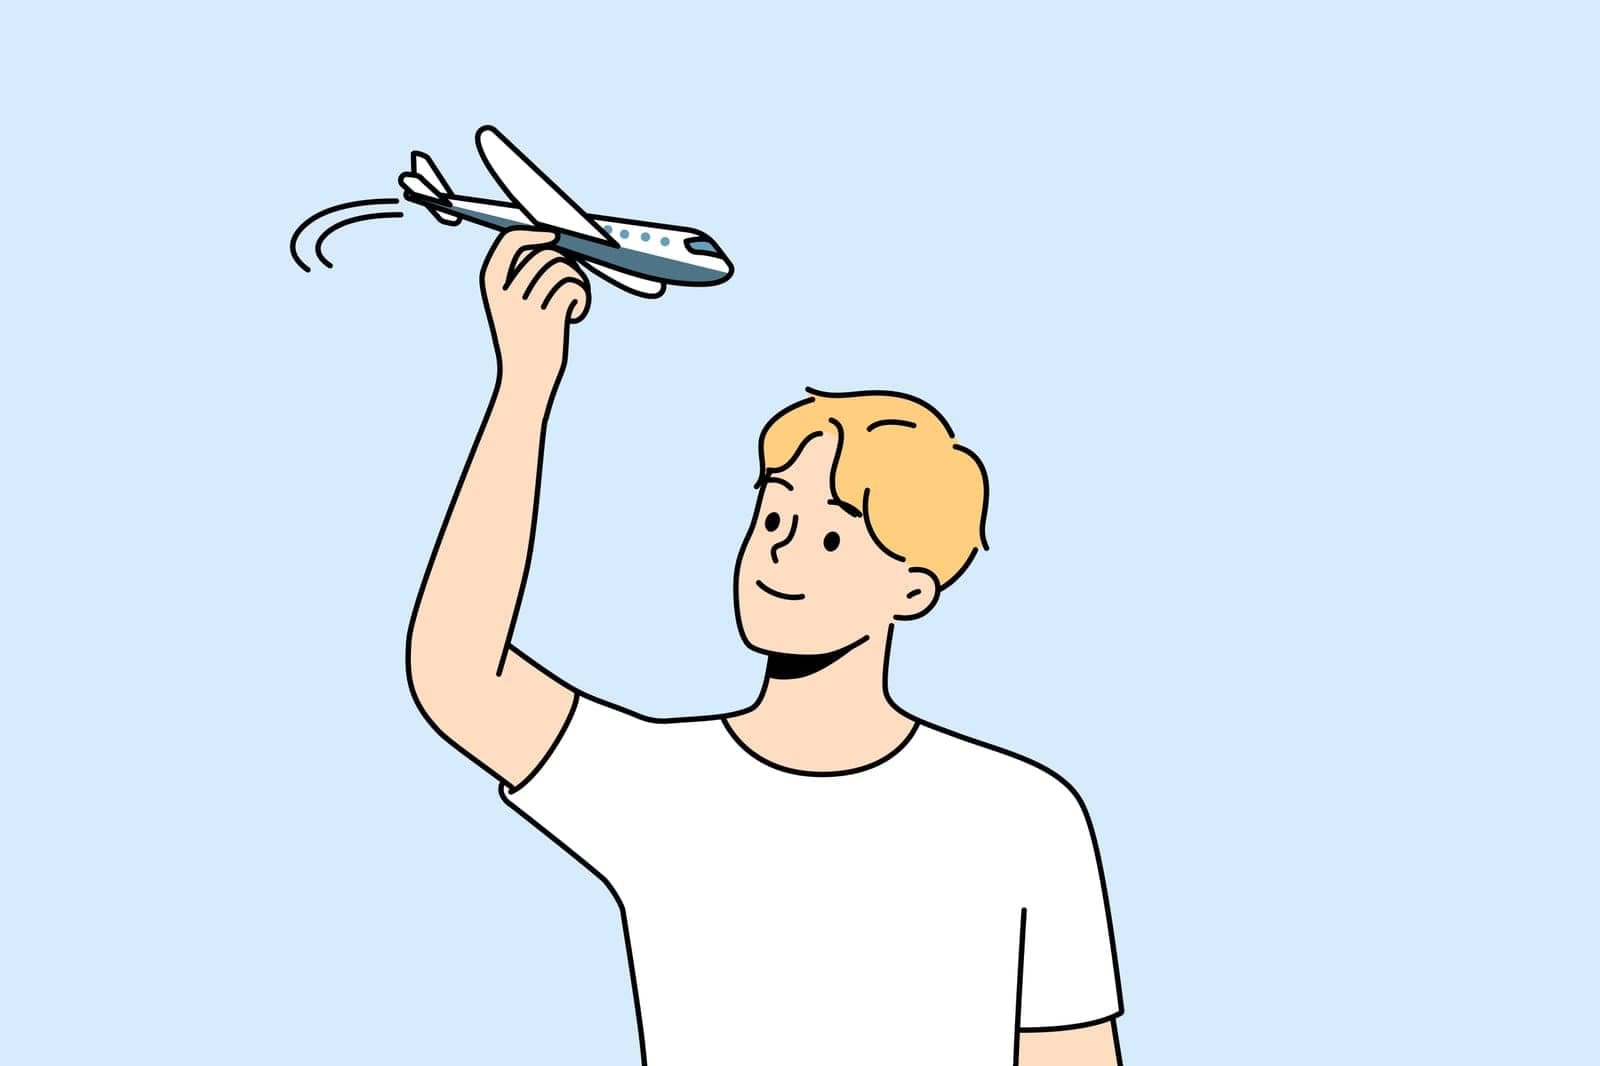 Young man have fun playing with airplane model. Smiling guy flying with plane miniature. Aviation and hobby. Vector illustration.